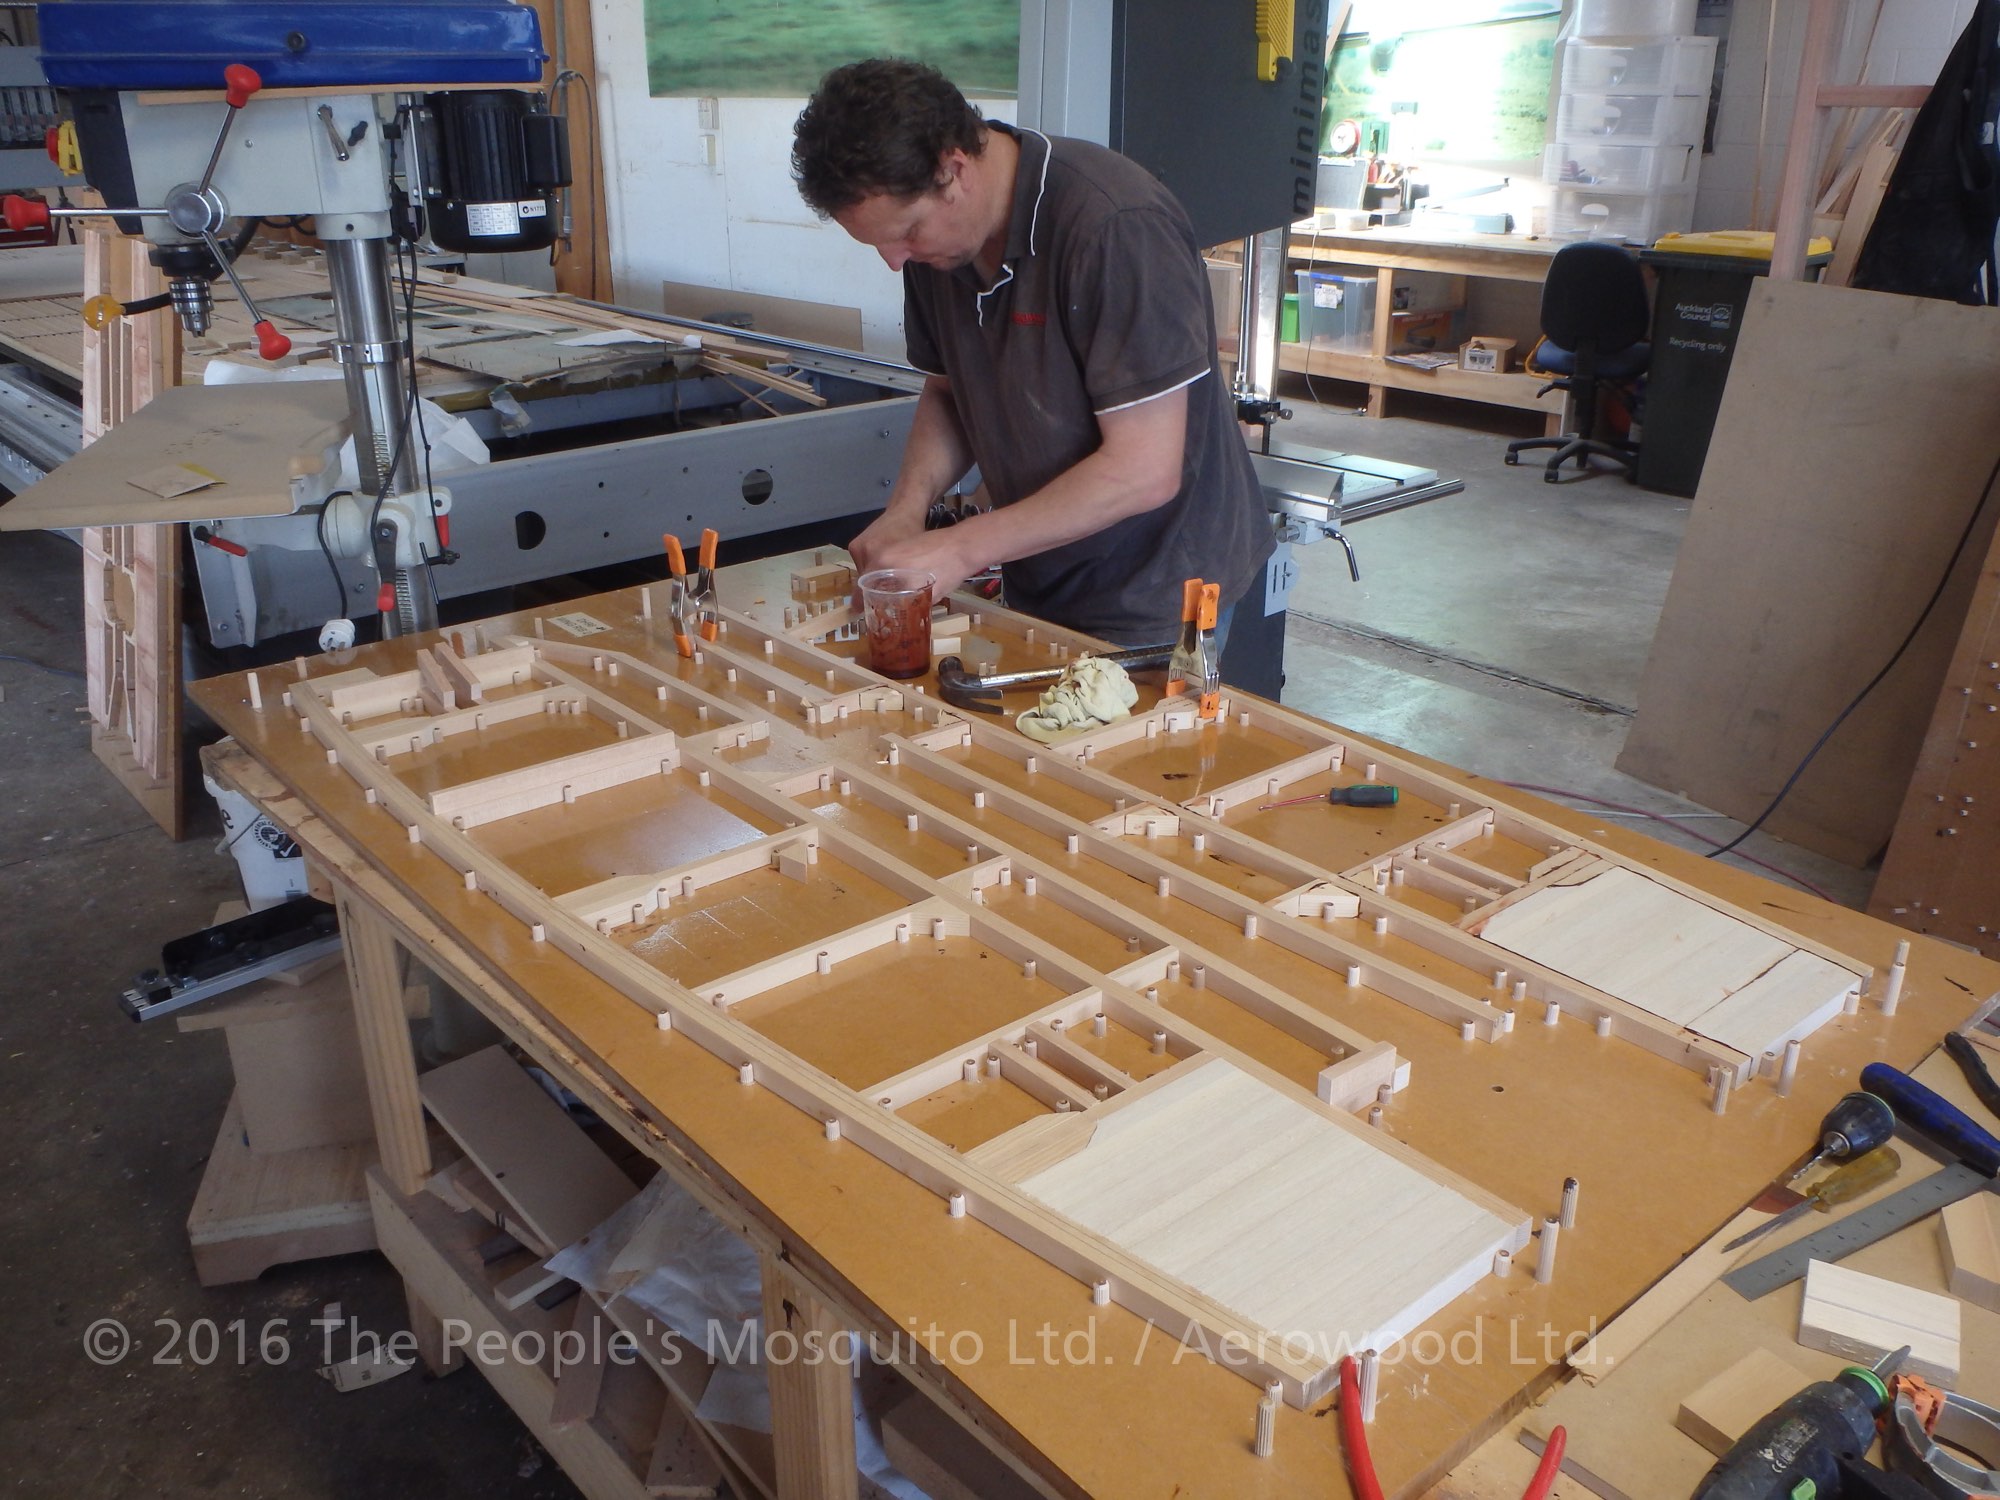 Assembling some of the wing ribs on one of the many different jigs. (photo via The People's Mosquito)